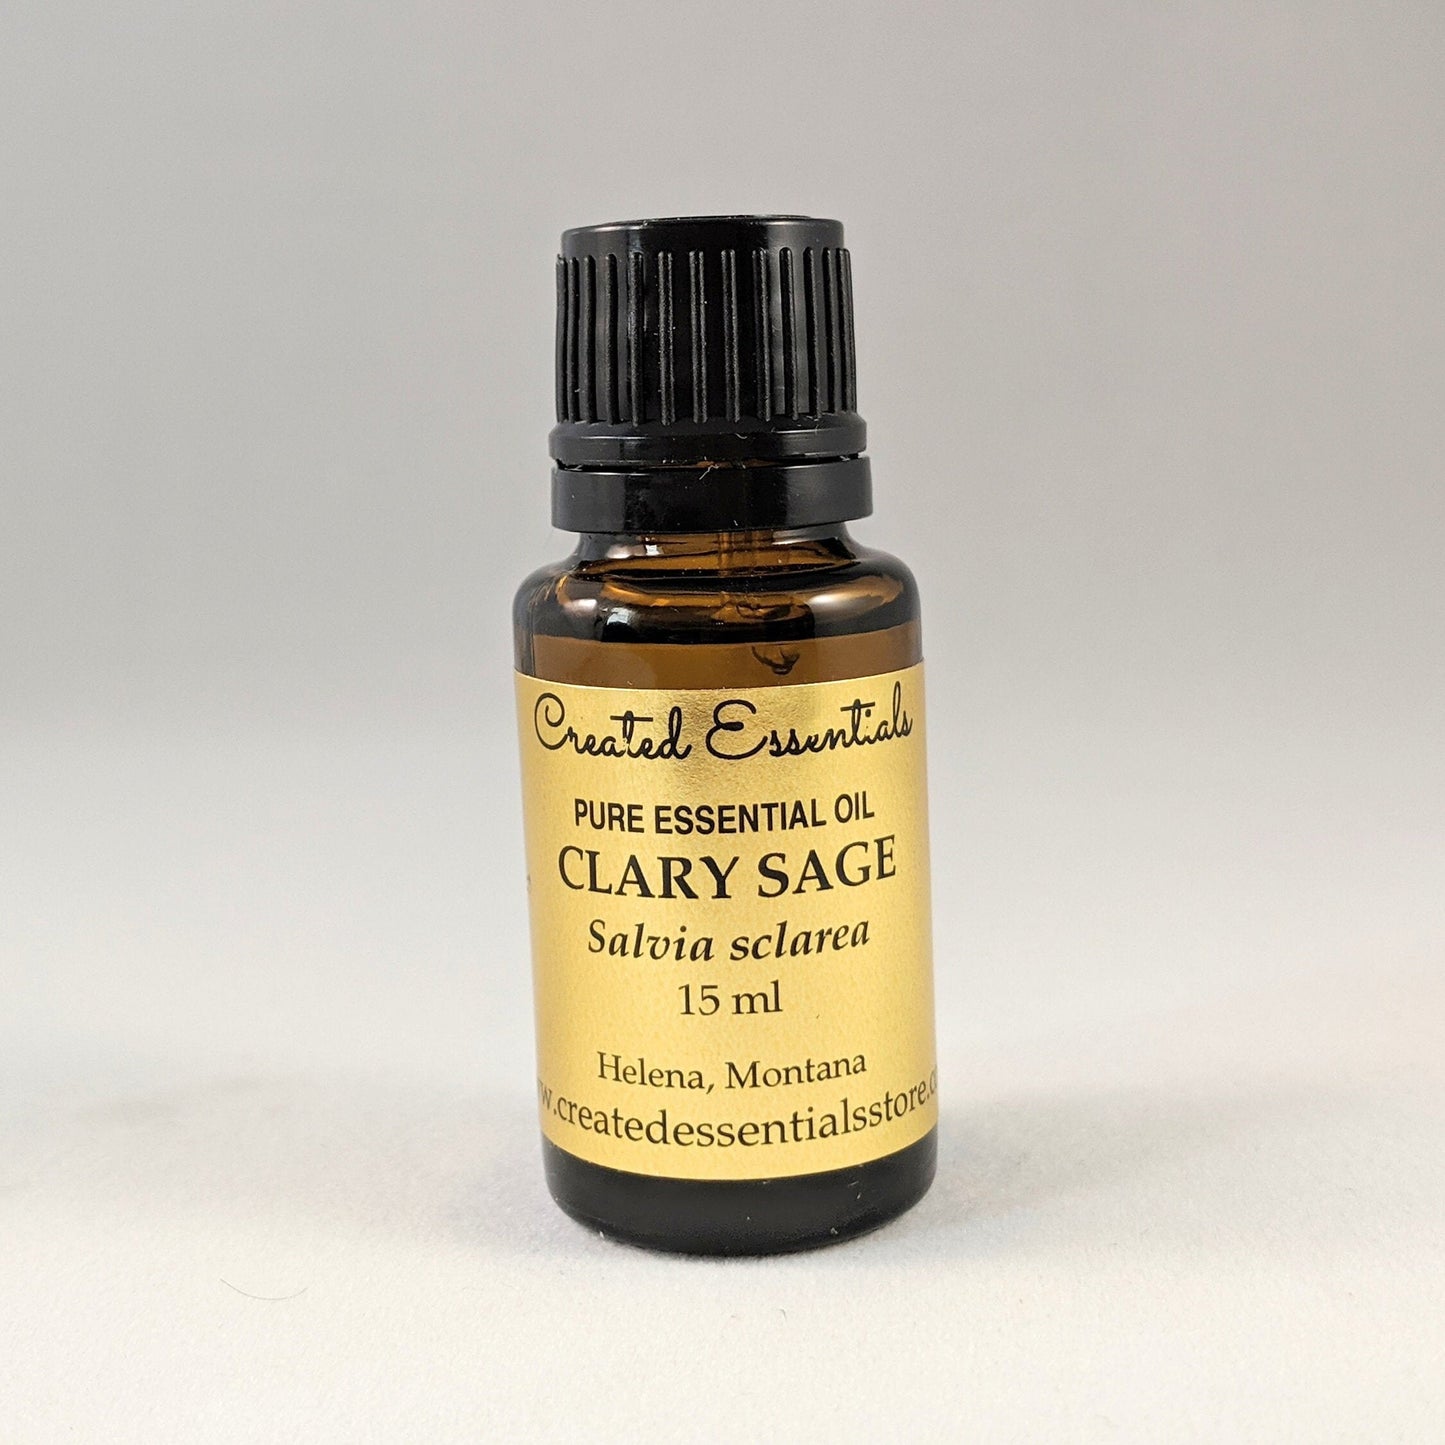 Clary Sage Essential Oil, 100% Pure Essential Oil of Clary Sage, Aromatherapy Oil, Essential Oil of Clary Sage from Russia